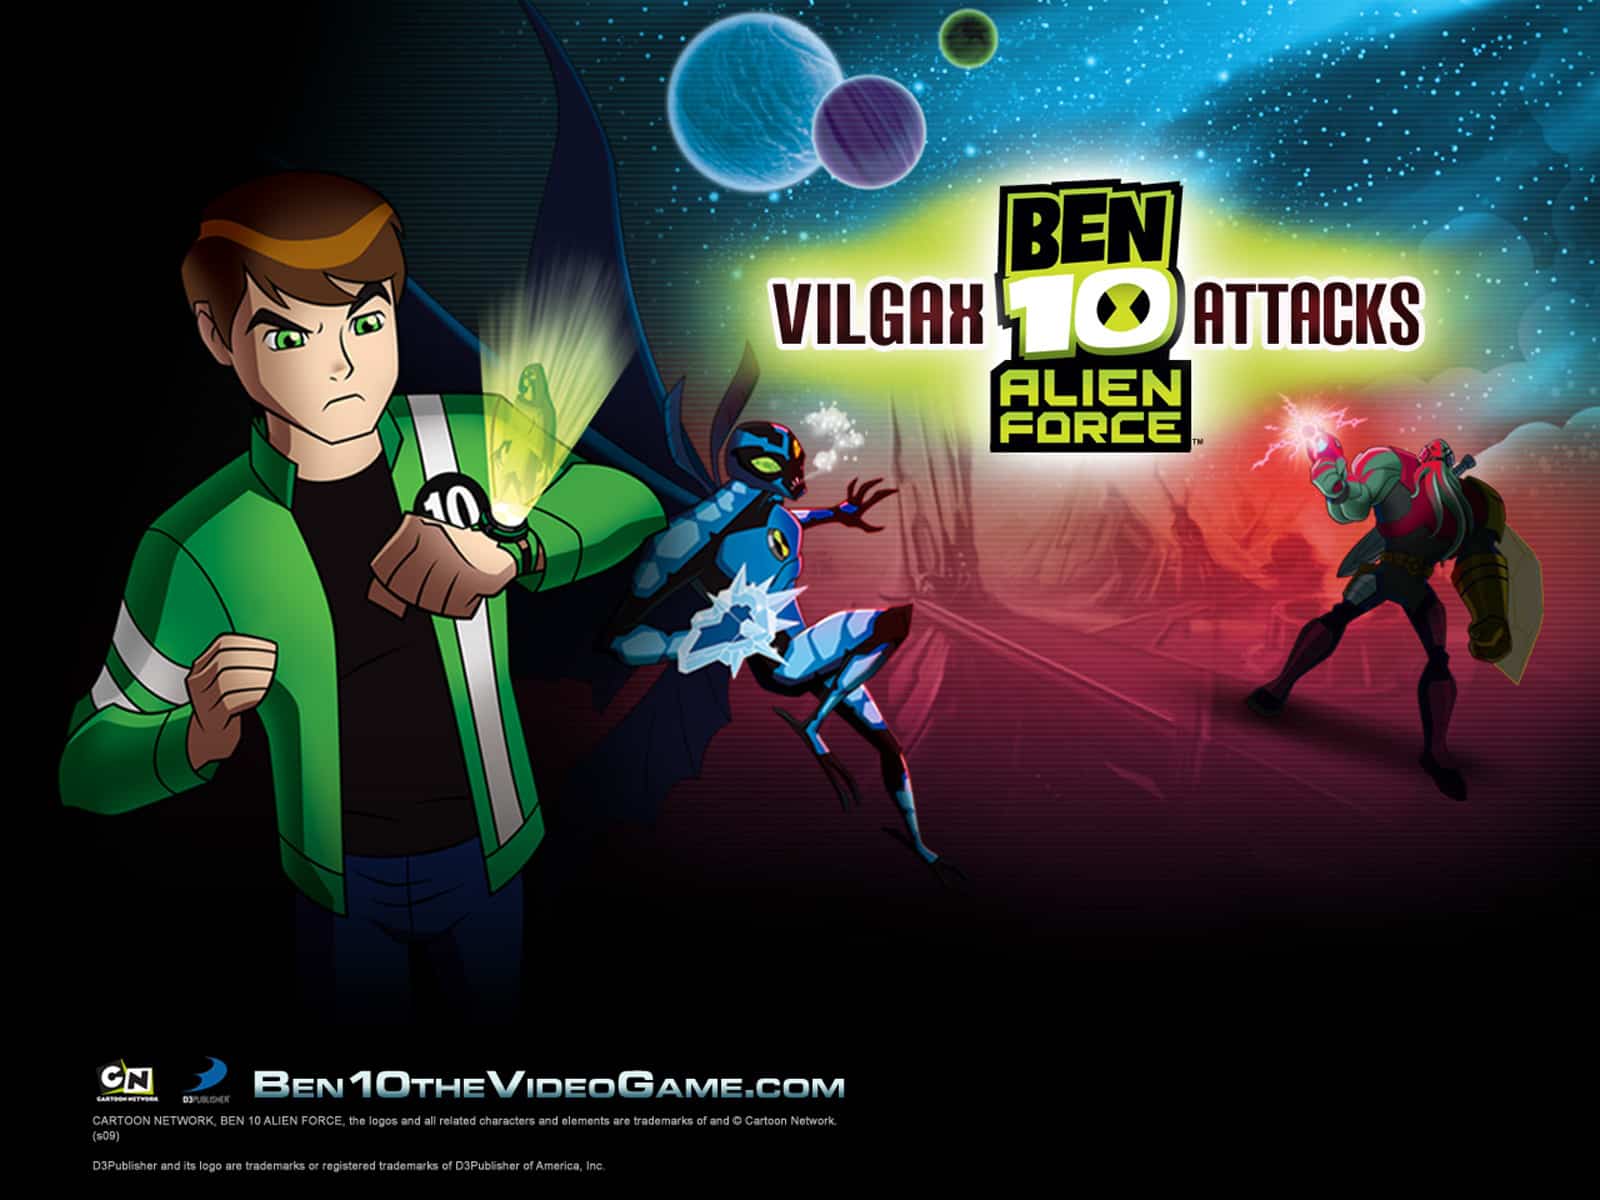 ben 10 alien force vilgax attacks game to play